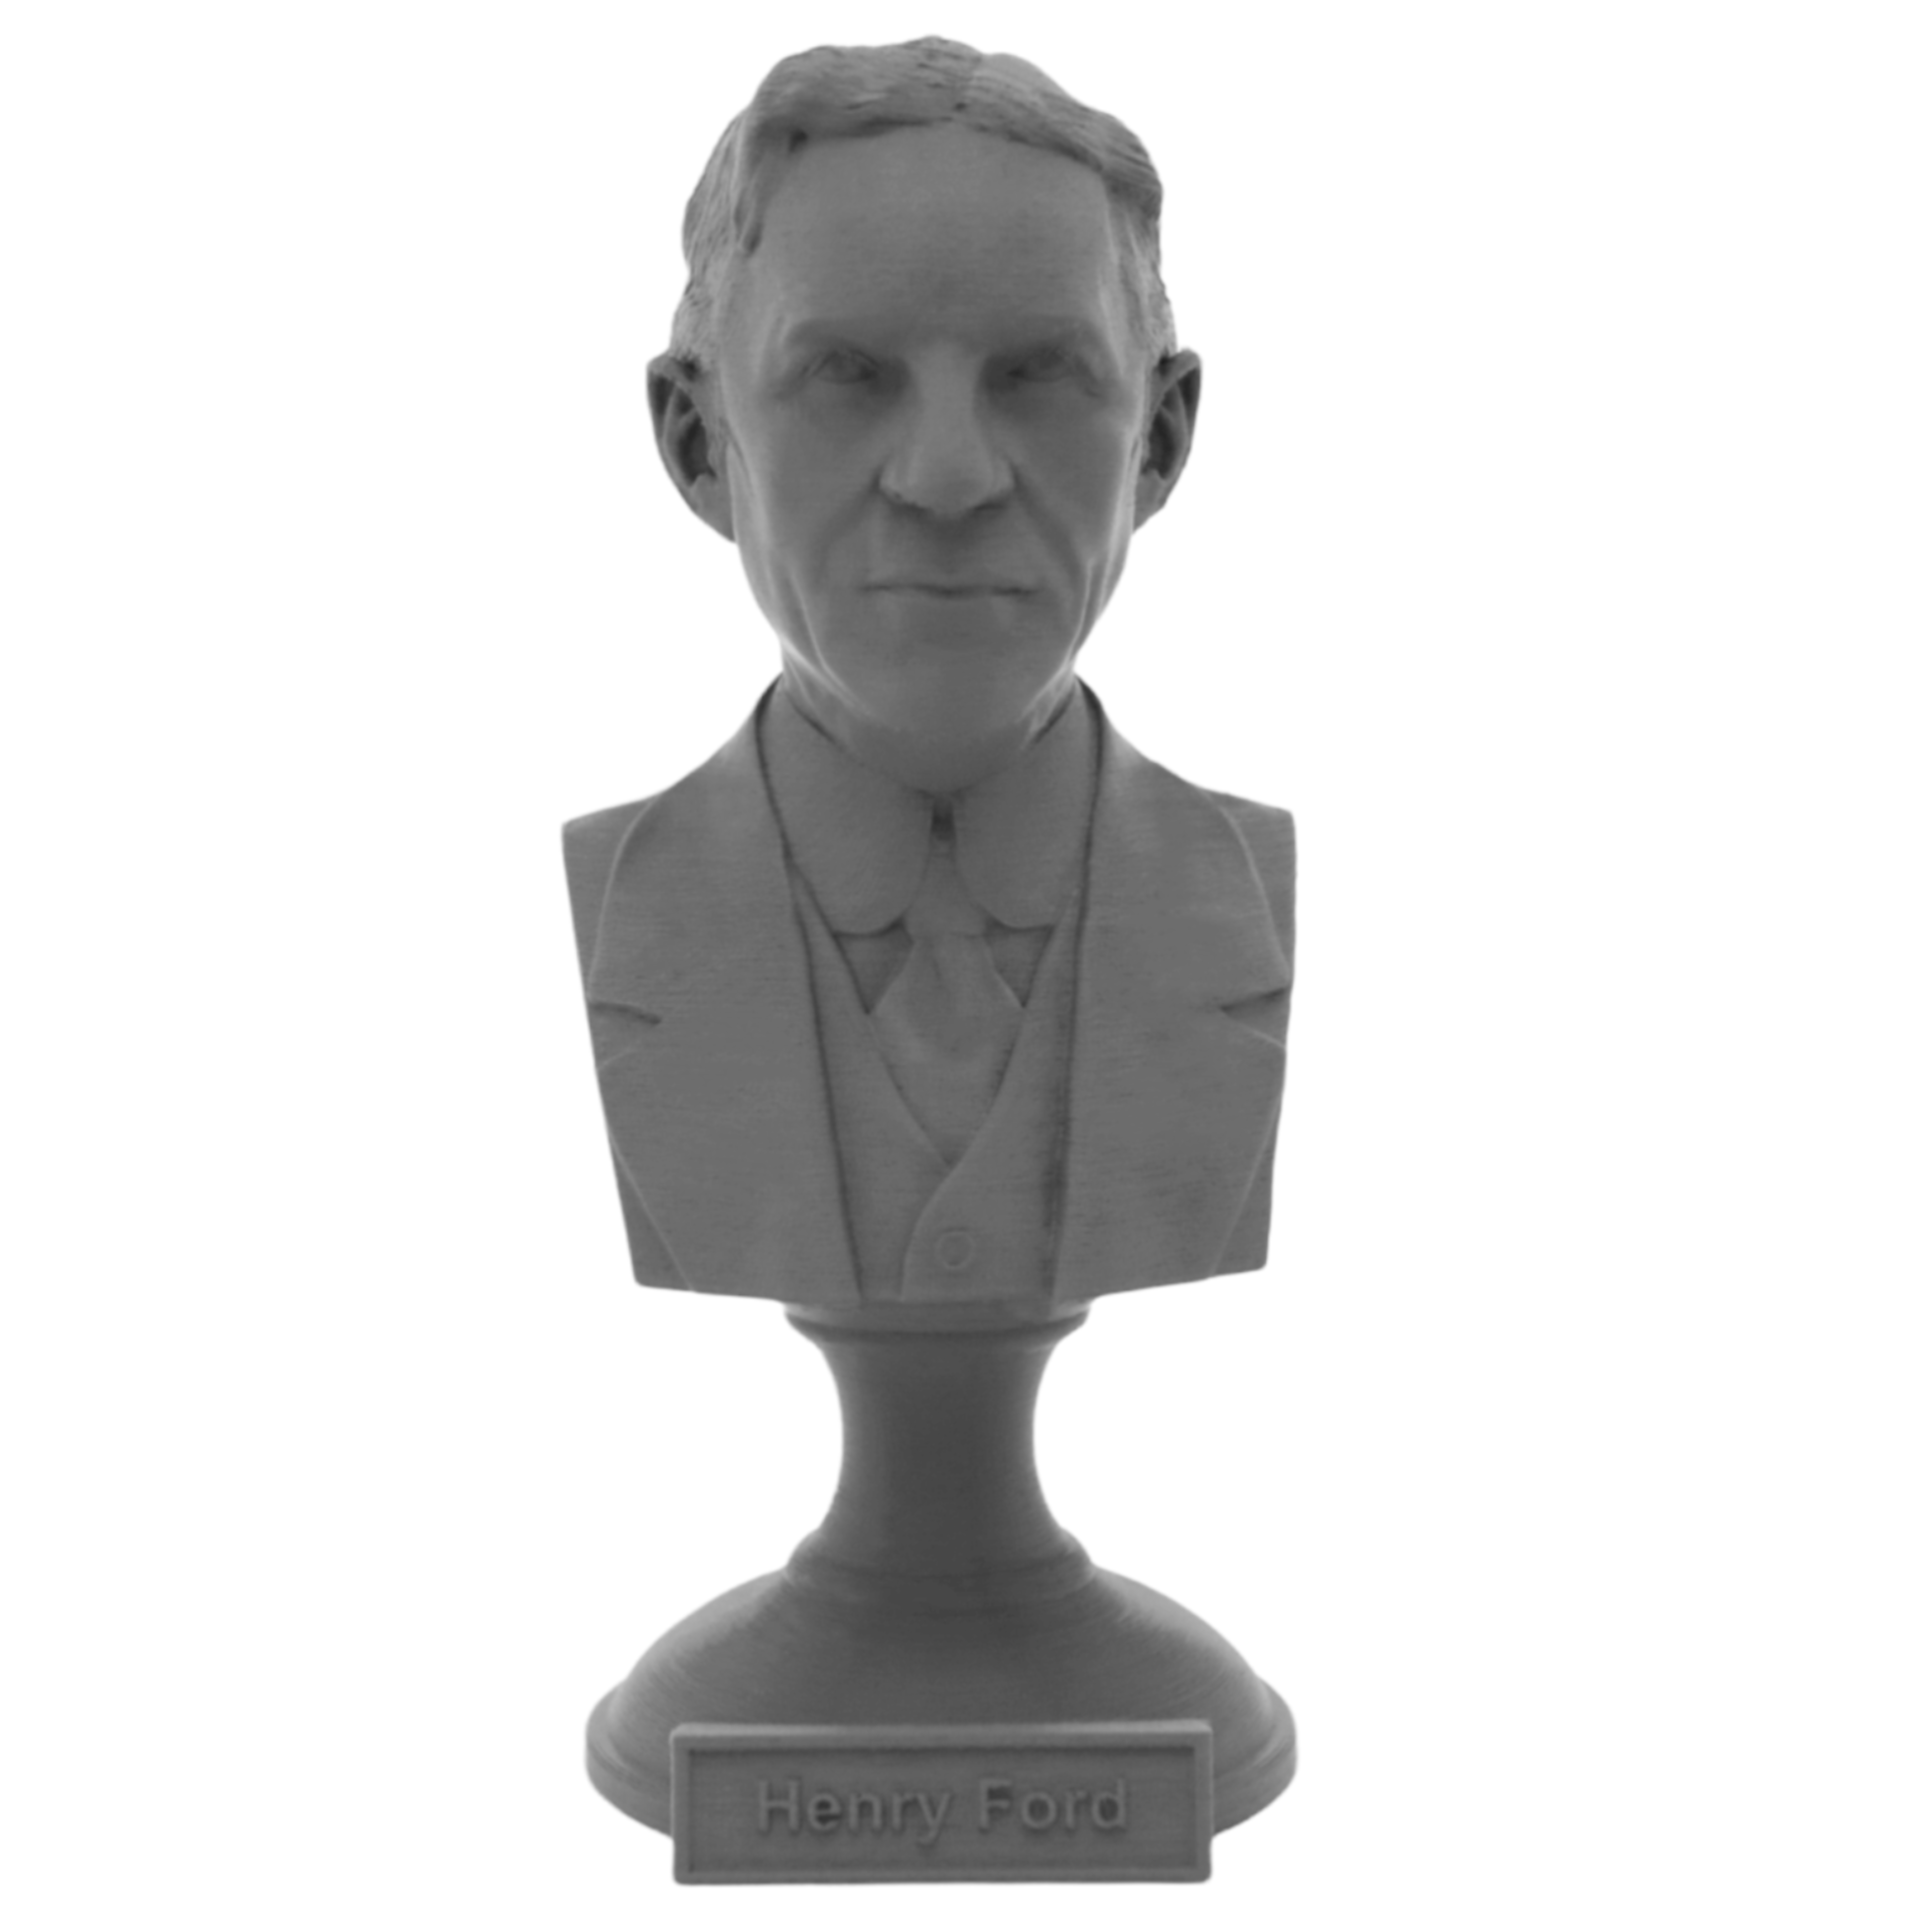 Henry Ford Famous American Industrialist and Business Magnate Sculpture Bust on Pedestal